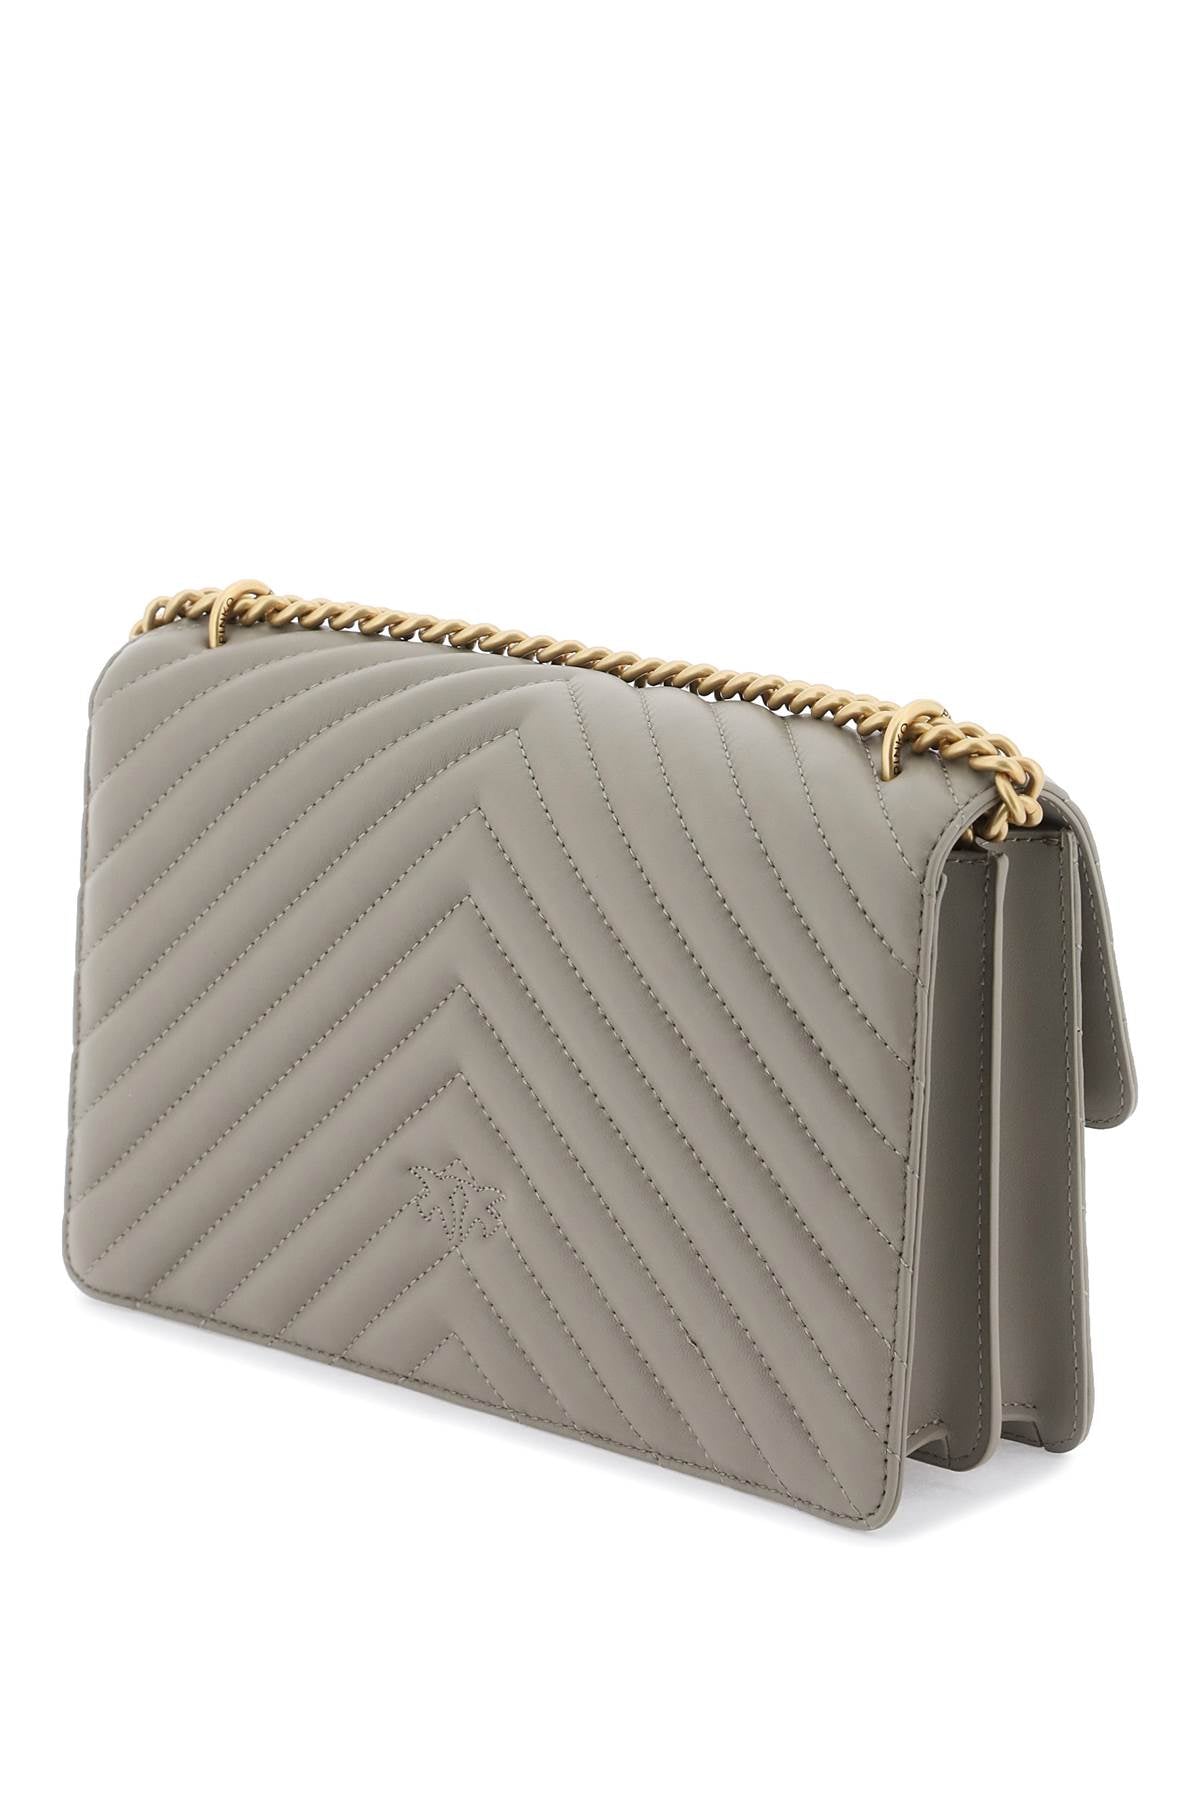 Pinko chevron quilted 'classic love bag one'-1